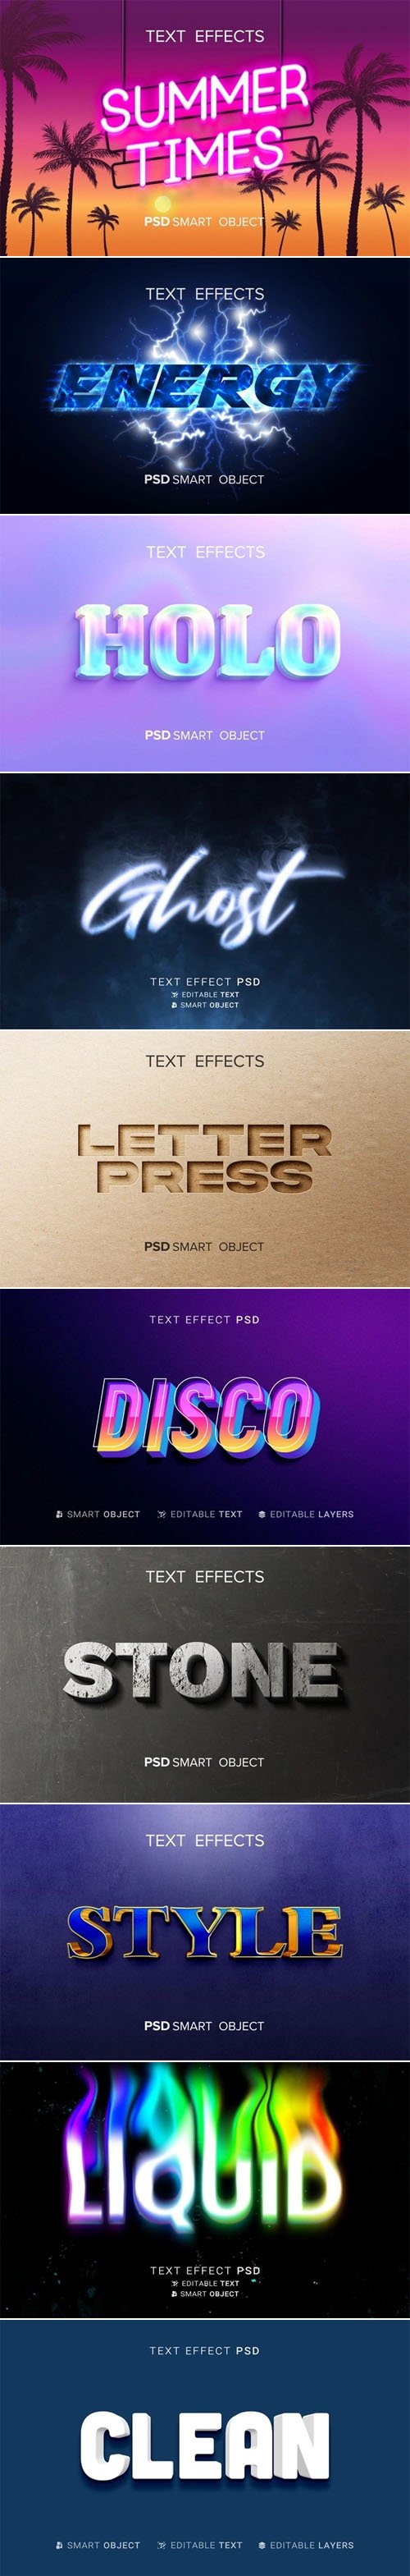 10 Creative Photoshop Text Effects Vol.2